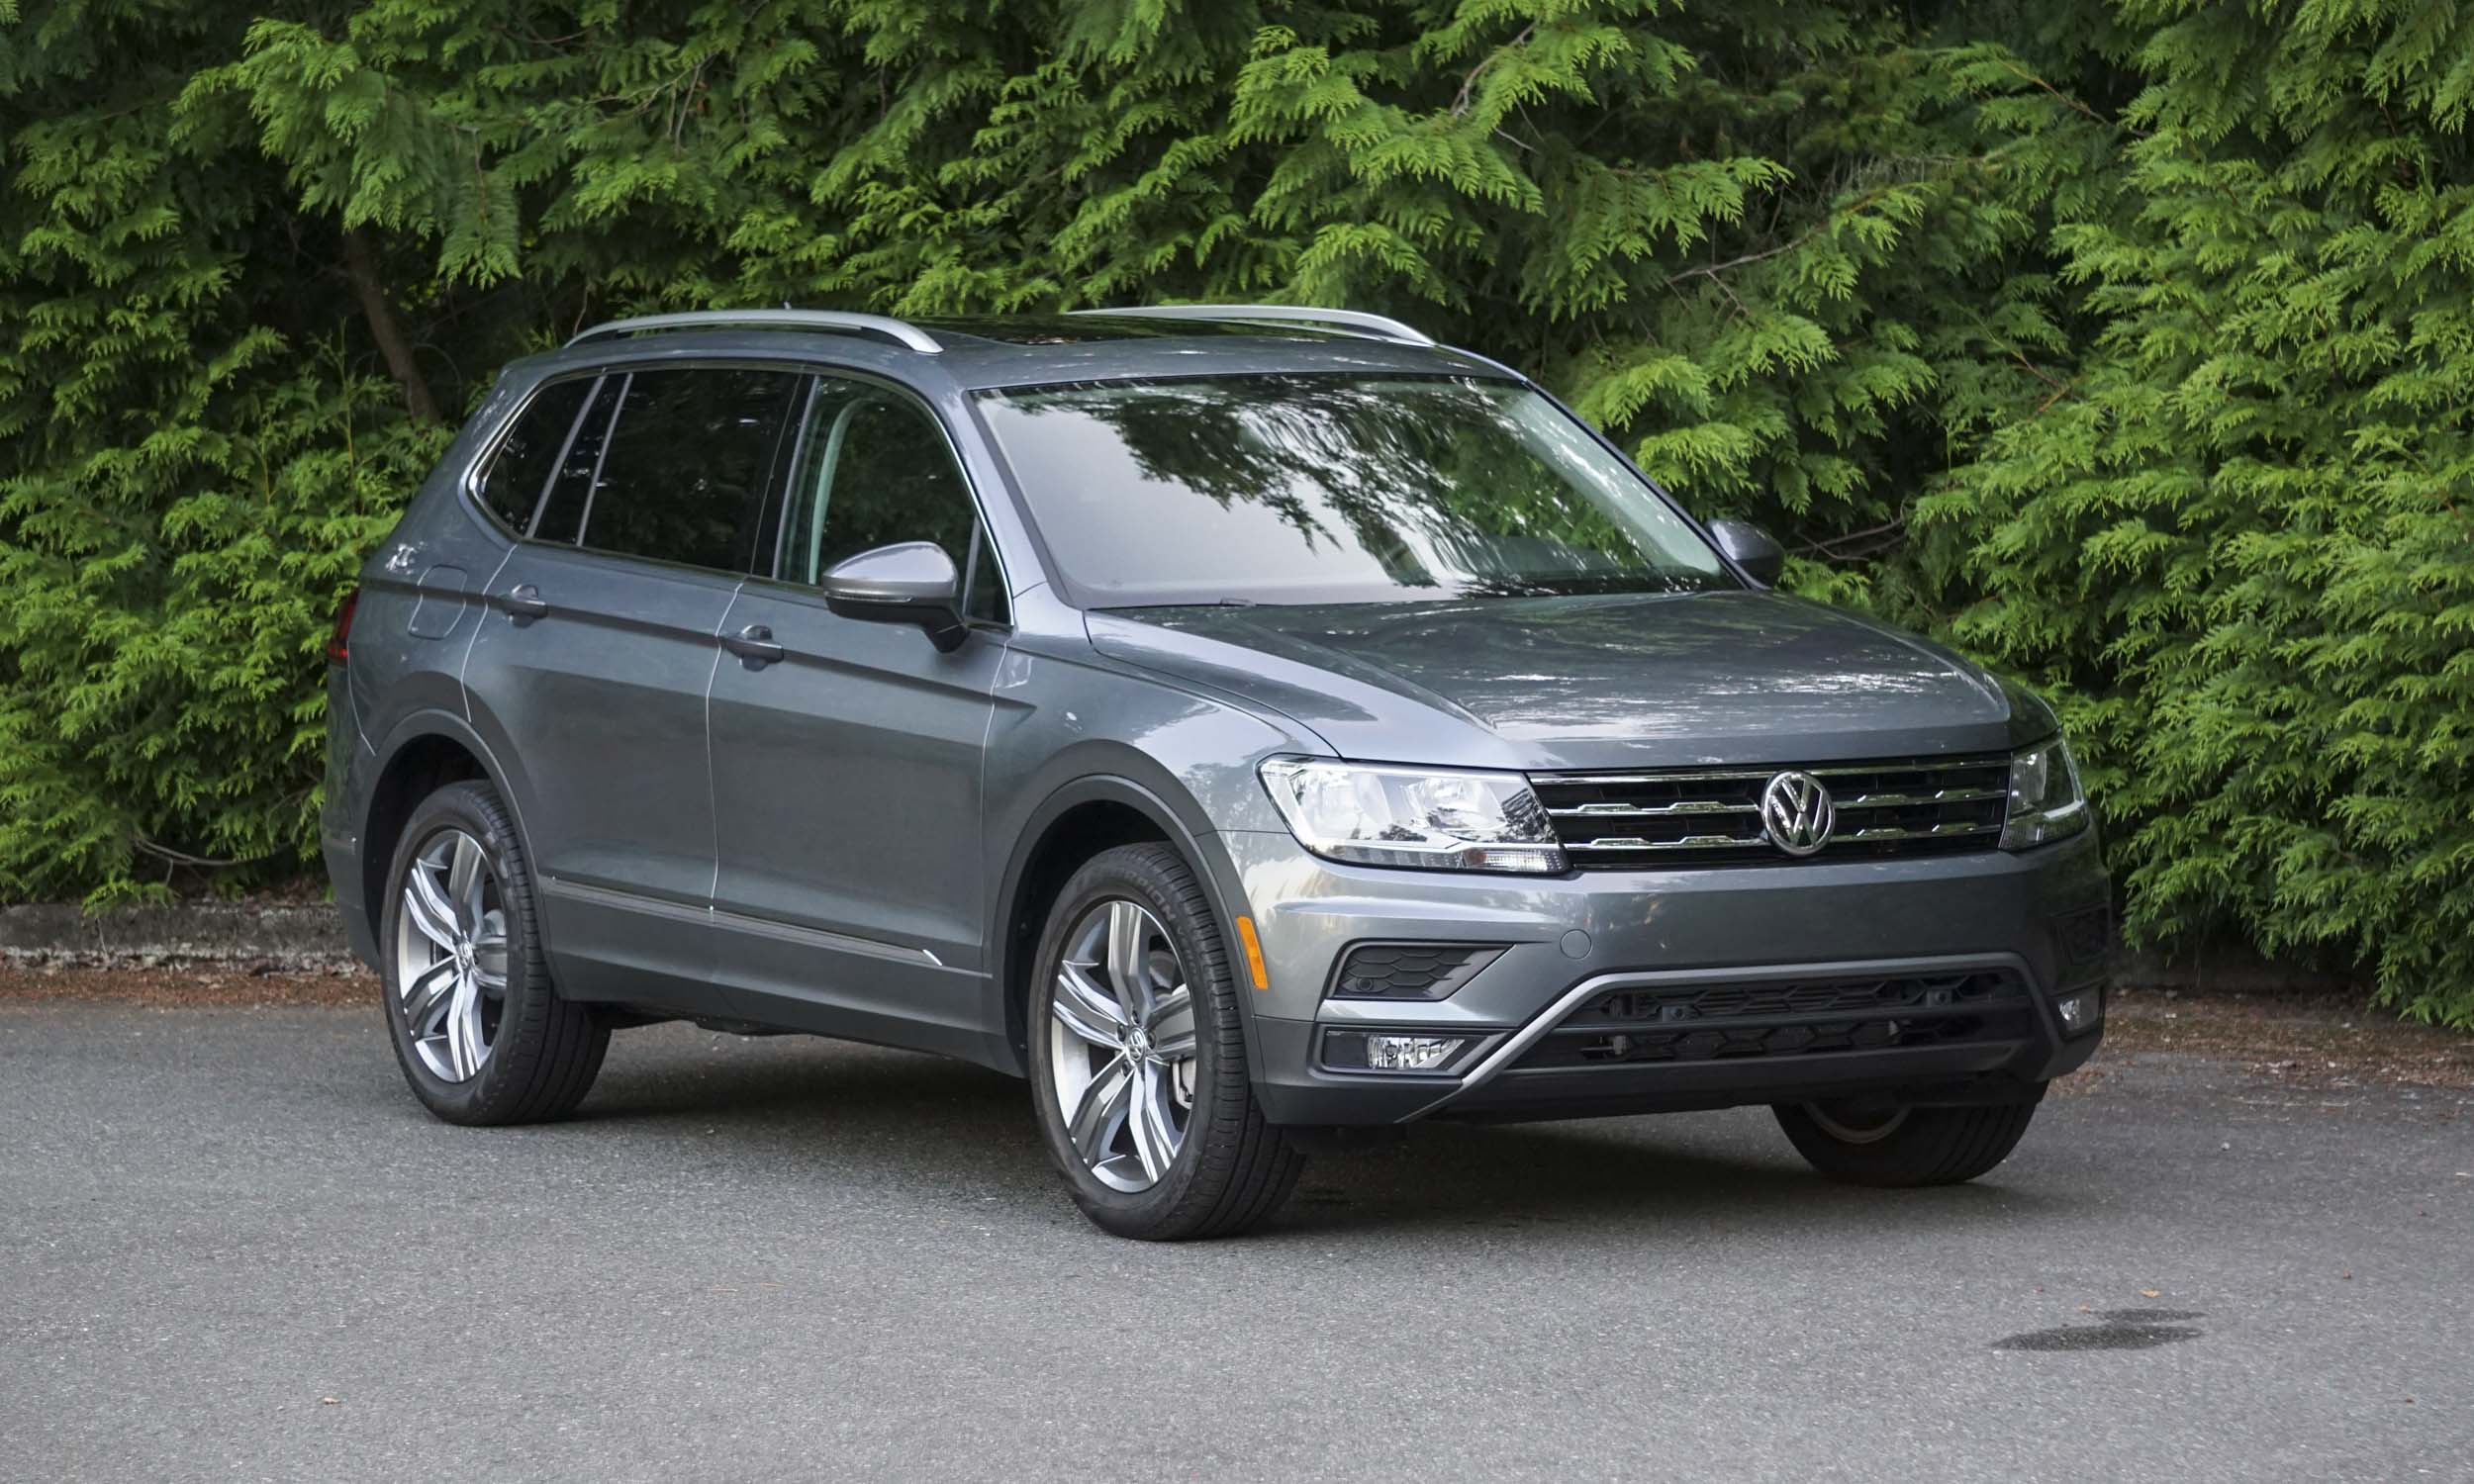 2020 Volkswagen Tiguan 2.0T SEL 4Motion: Review | Our Auto Expert